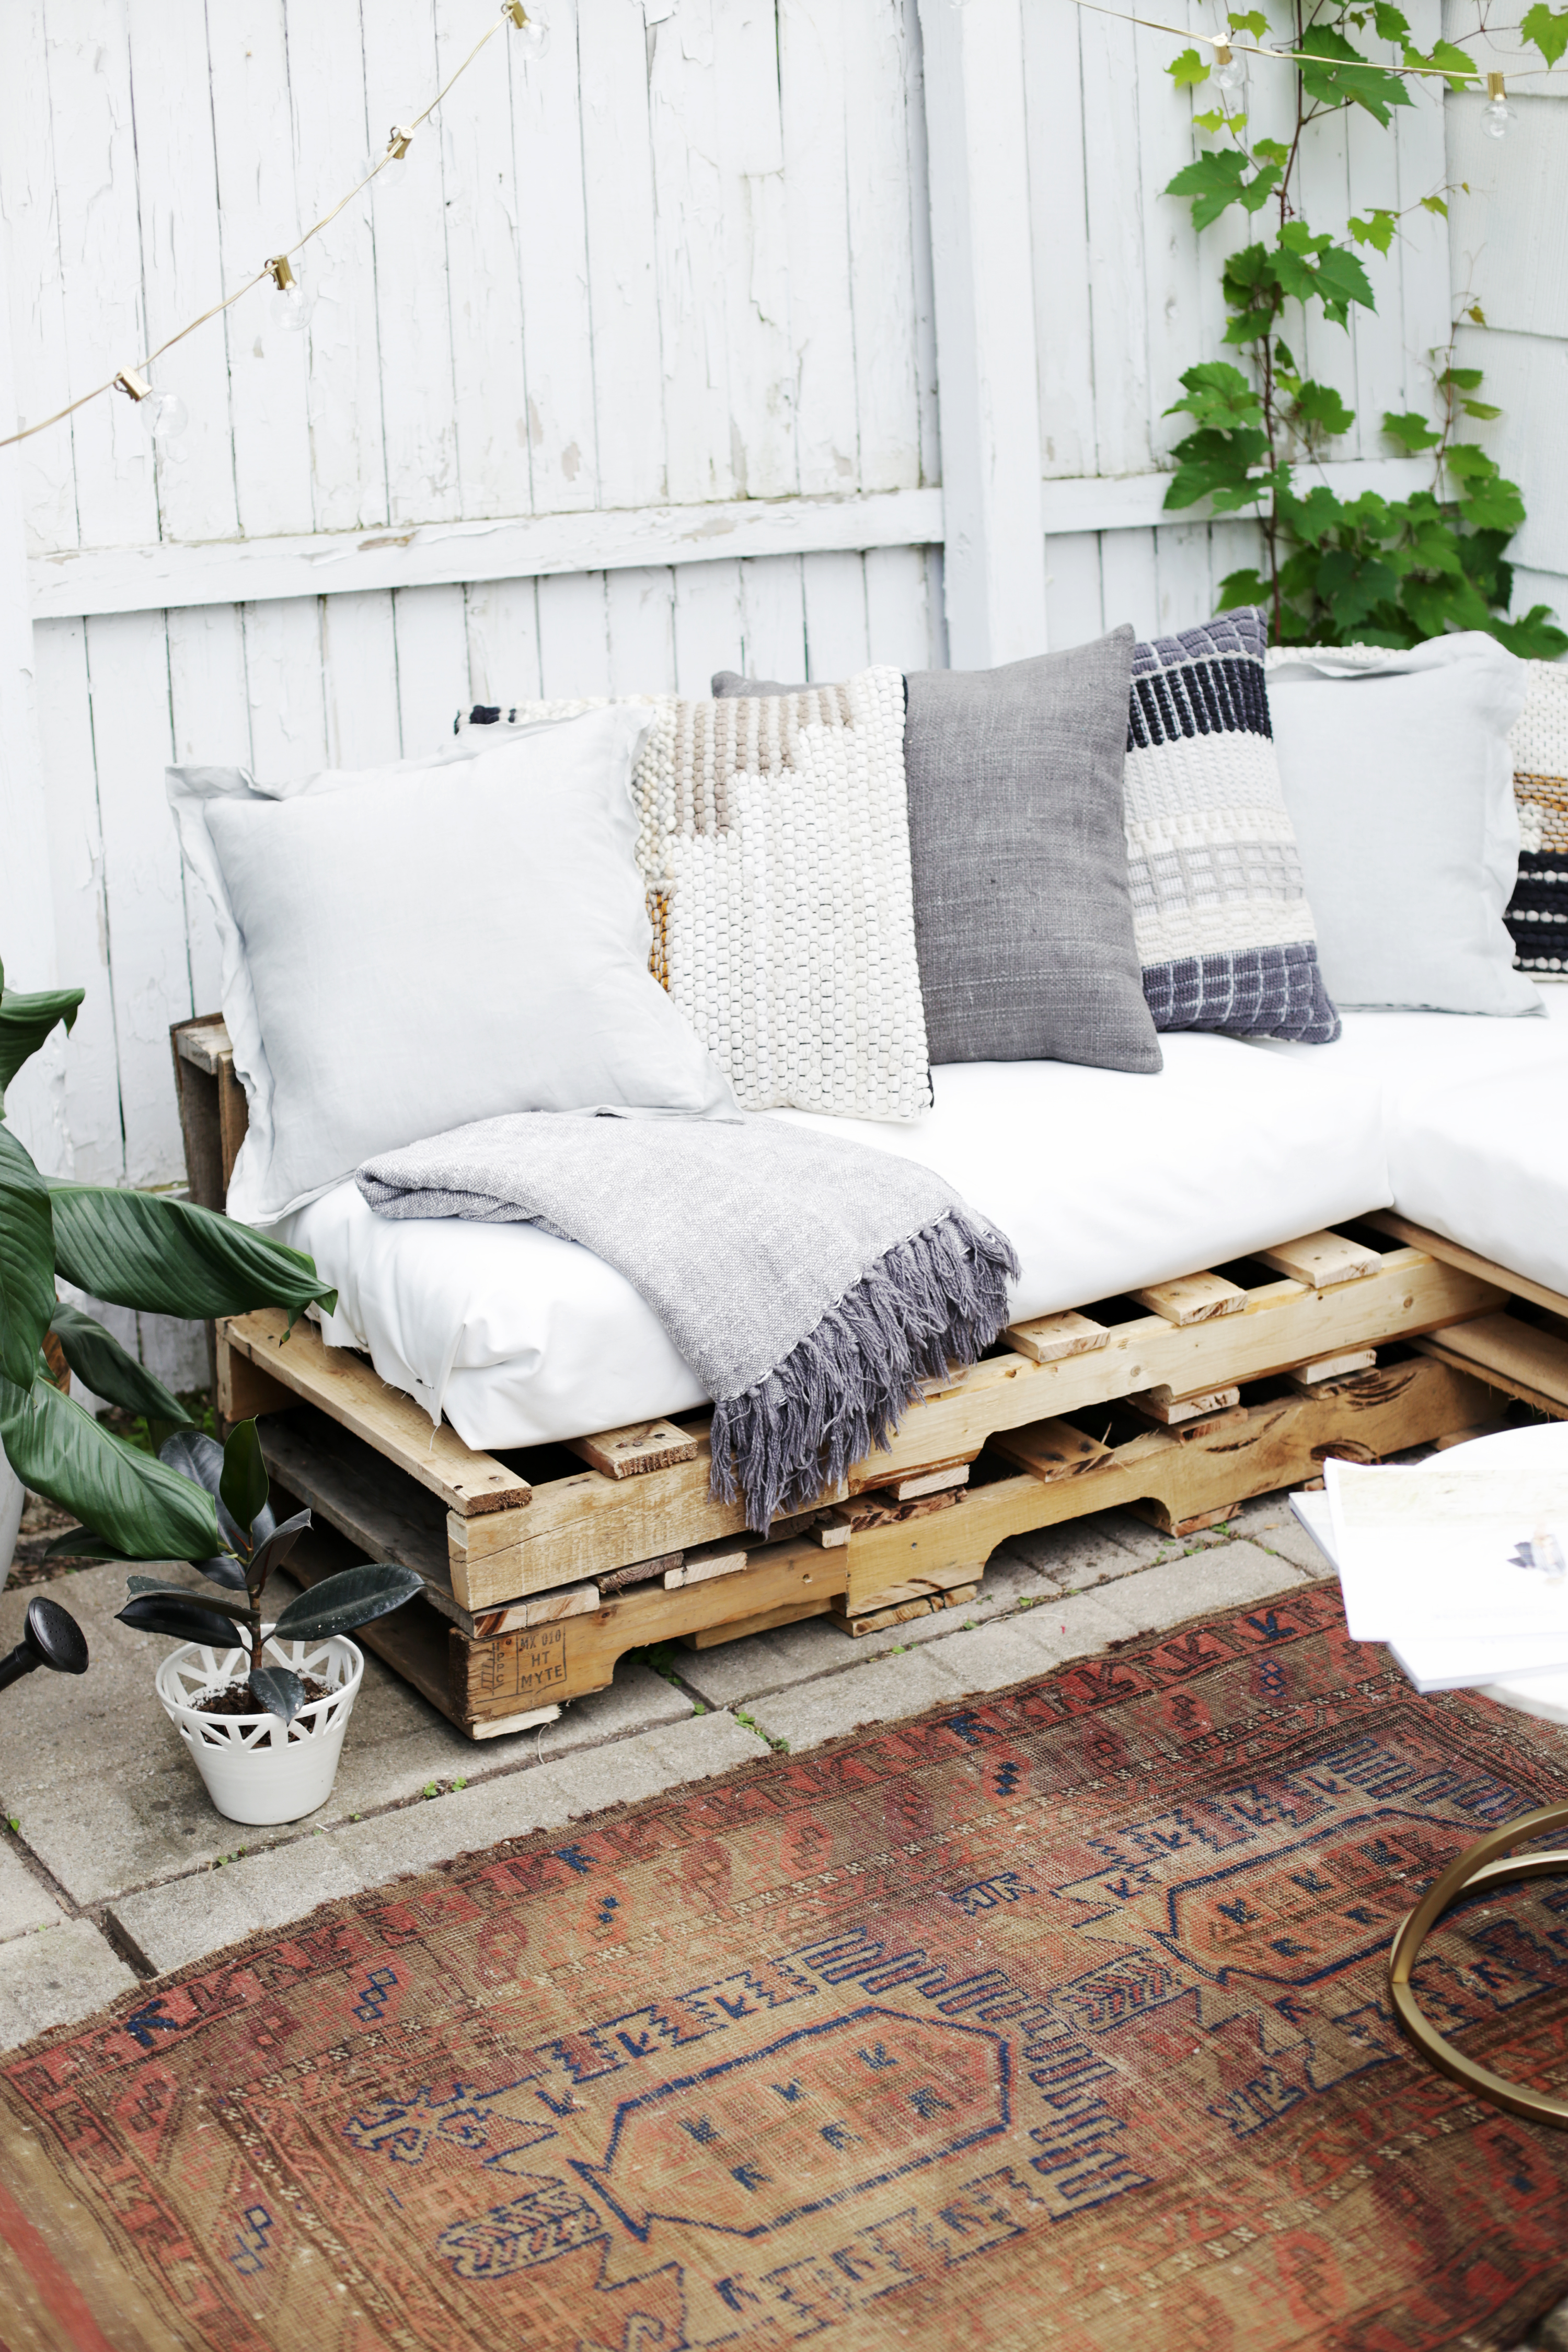 Assembly sofa with pallets 